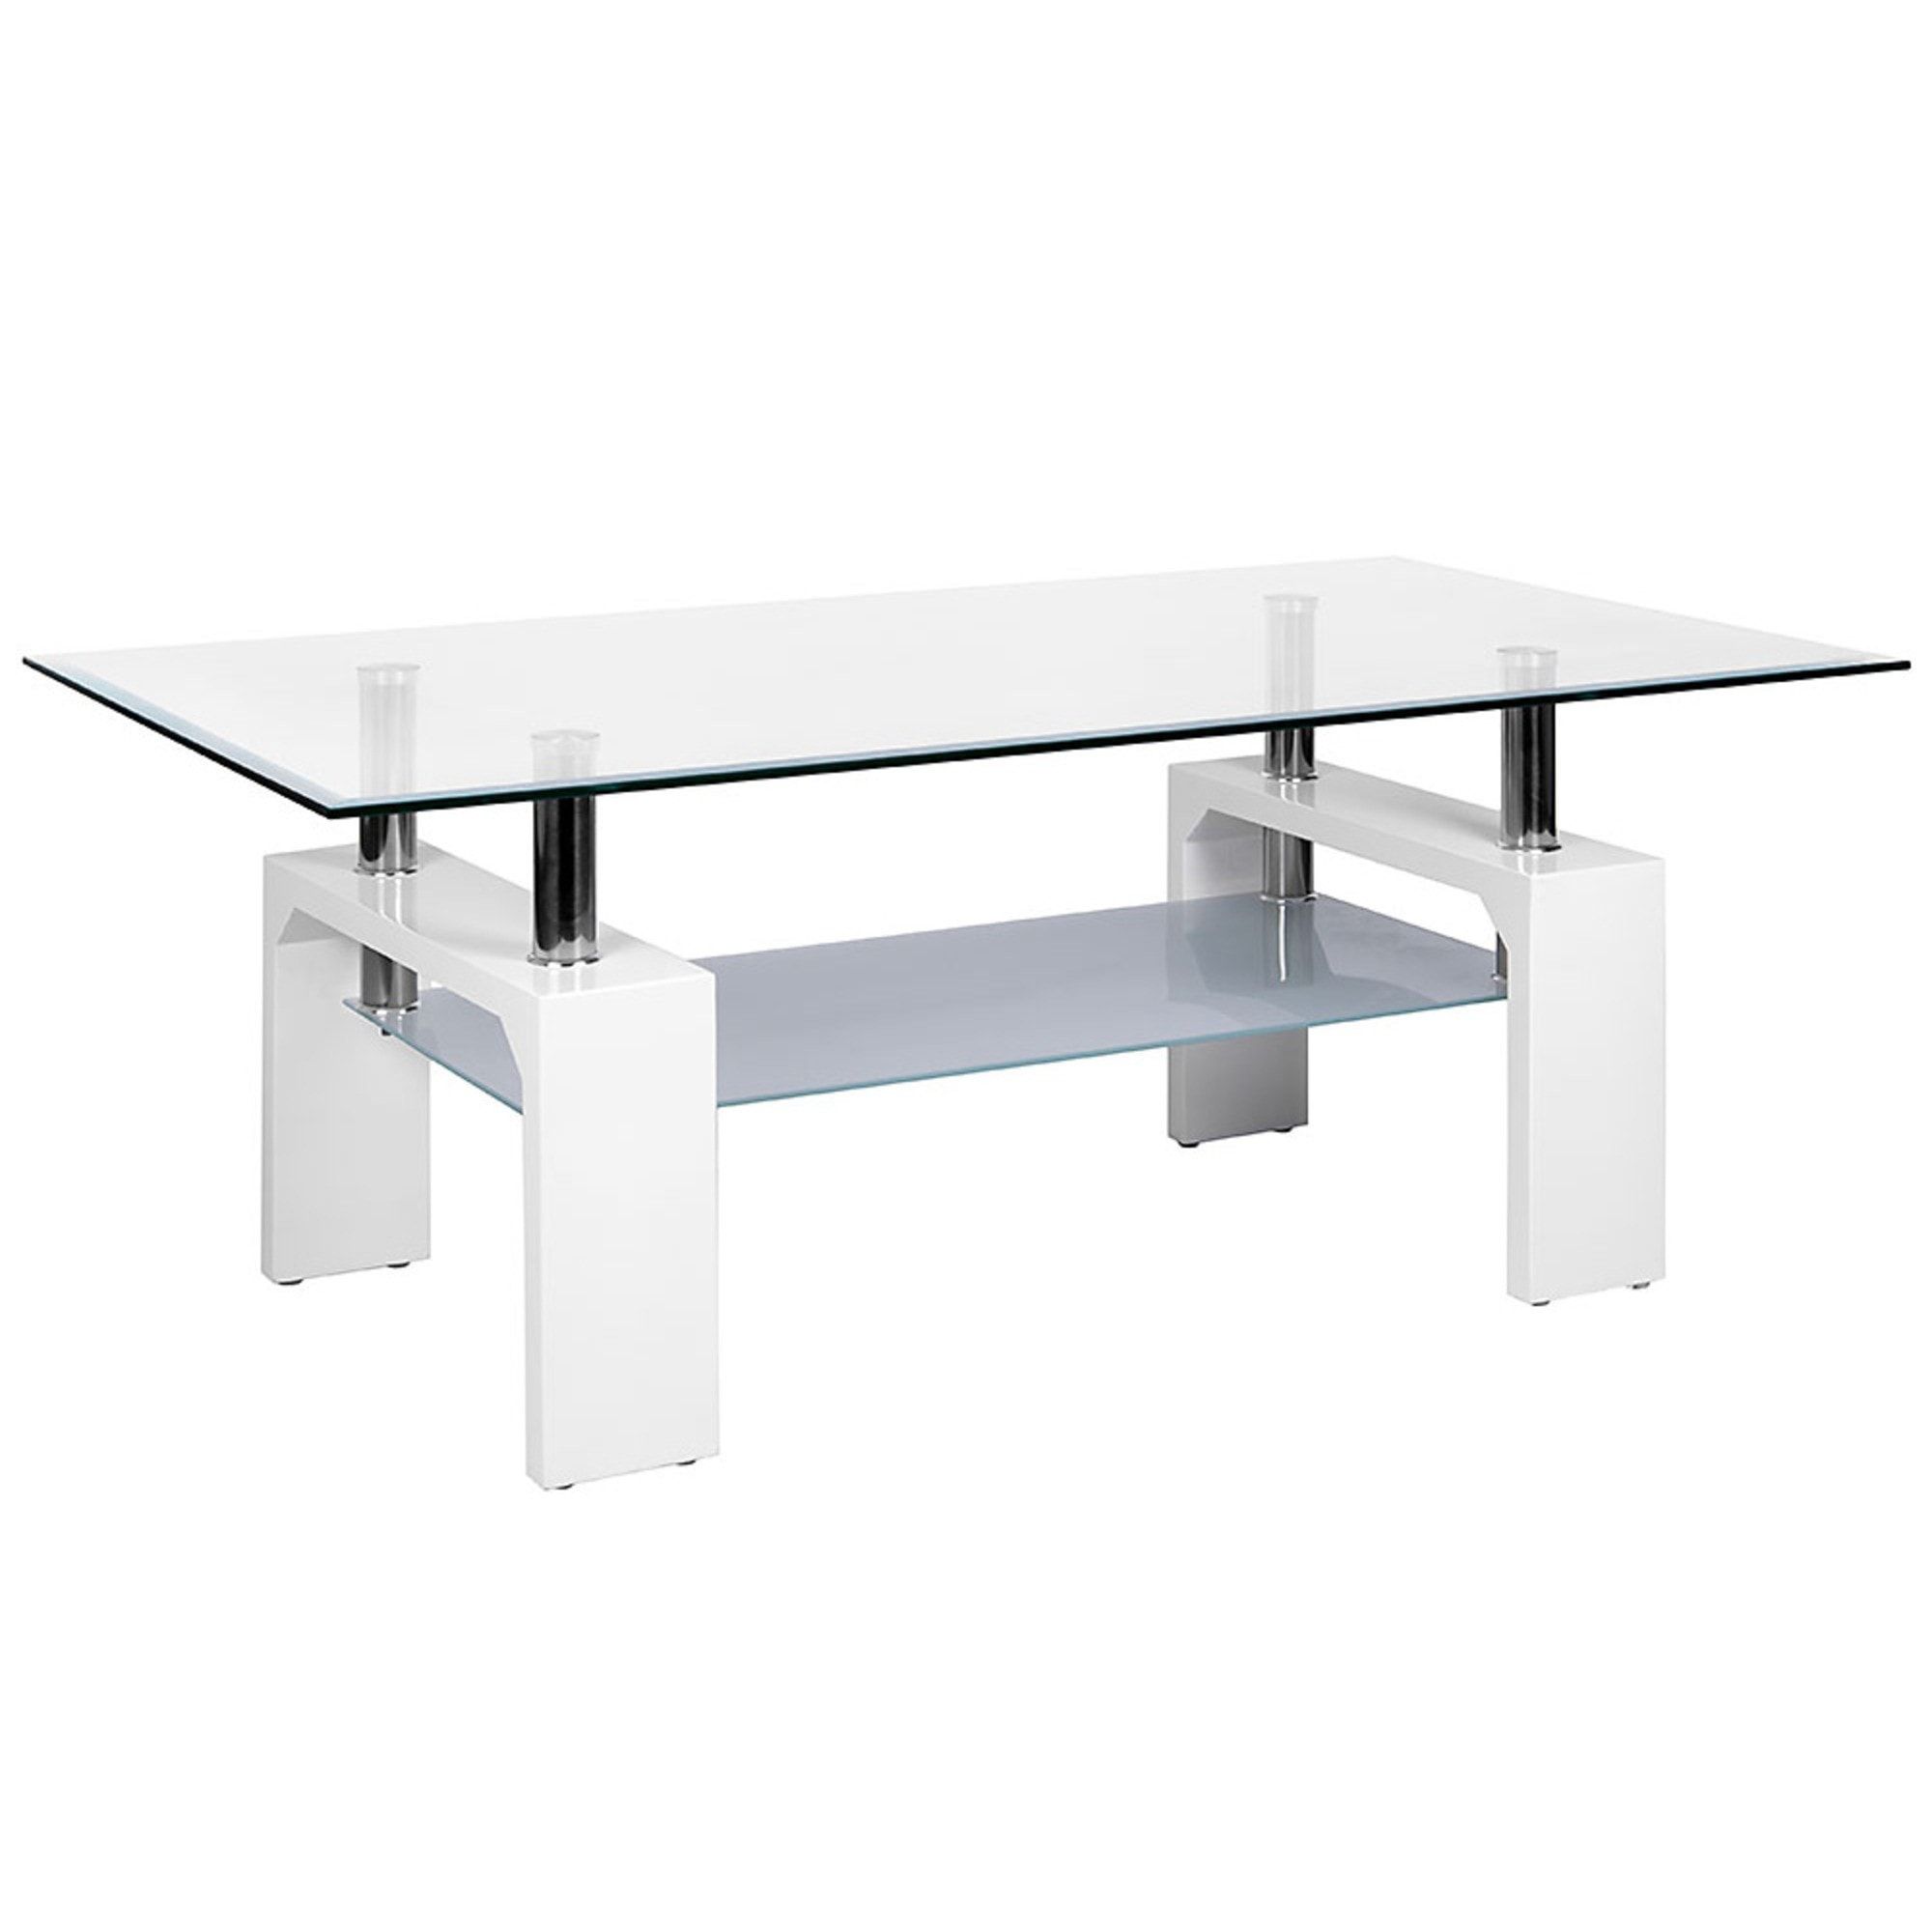 Elise Rectangular Clear Glass Coffee Table | Dining | Glass Furniture In Clear Rectangle Center Coffee Tables (Gallery 5 of 20)